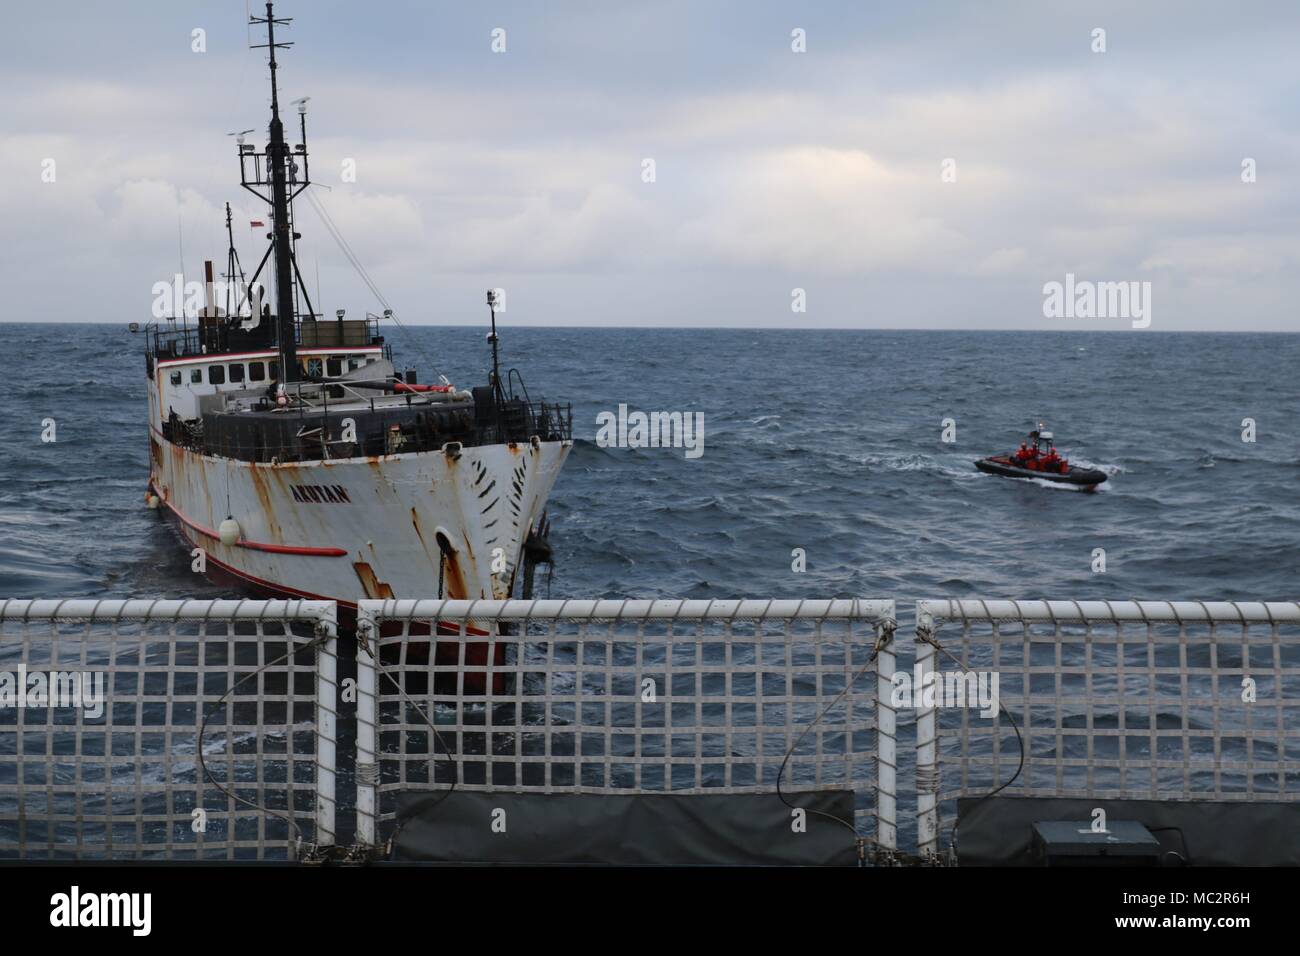 The crew of the Coast Guard Cutter Alex Haley prepares to break tow with the fishing vessel Akutan 25 nautical miles northwest of Dutch Harbor, Alaska, Jan. 25, 2018. In early January, the Alaska Department of Natural Resources requested Coast Guard assistance in towing the Akutan to a scuttling site after it was determined the abandoned vessel posed an emergency to life, property and the environment as it sat derelict, exposed to Bering Sea weather conditions. (U.S. Coast Guard photo by Lt.j.g. Matthew Schoen) Stock Photo